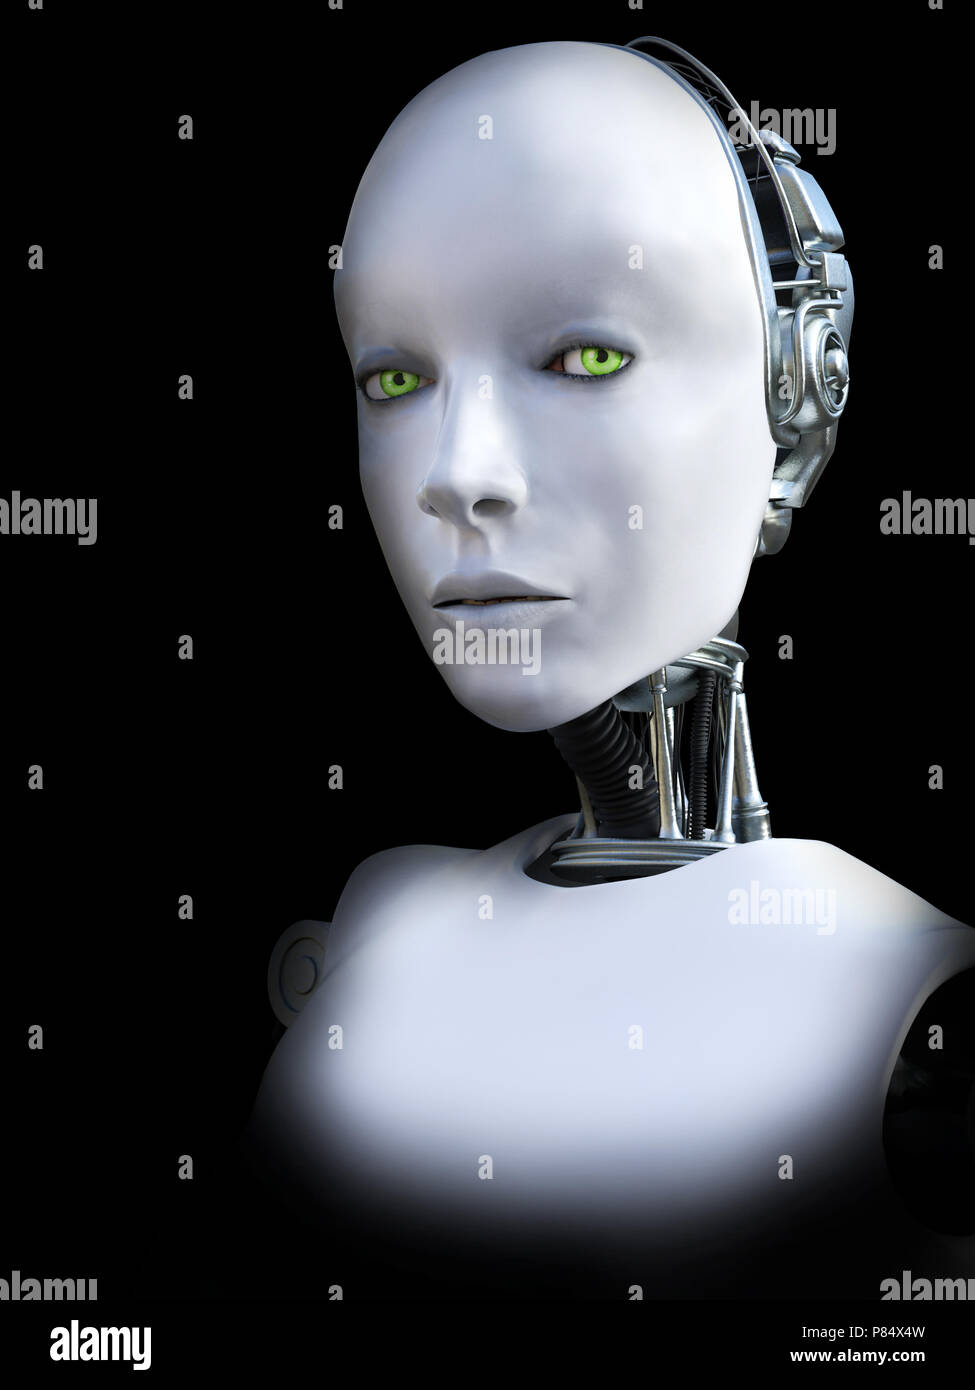 Face portrait of a female robot, 3D rendering. Black background. Stock Photo